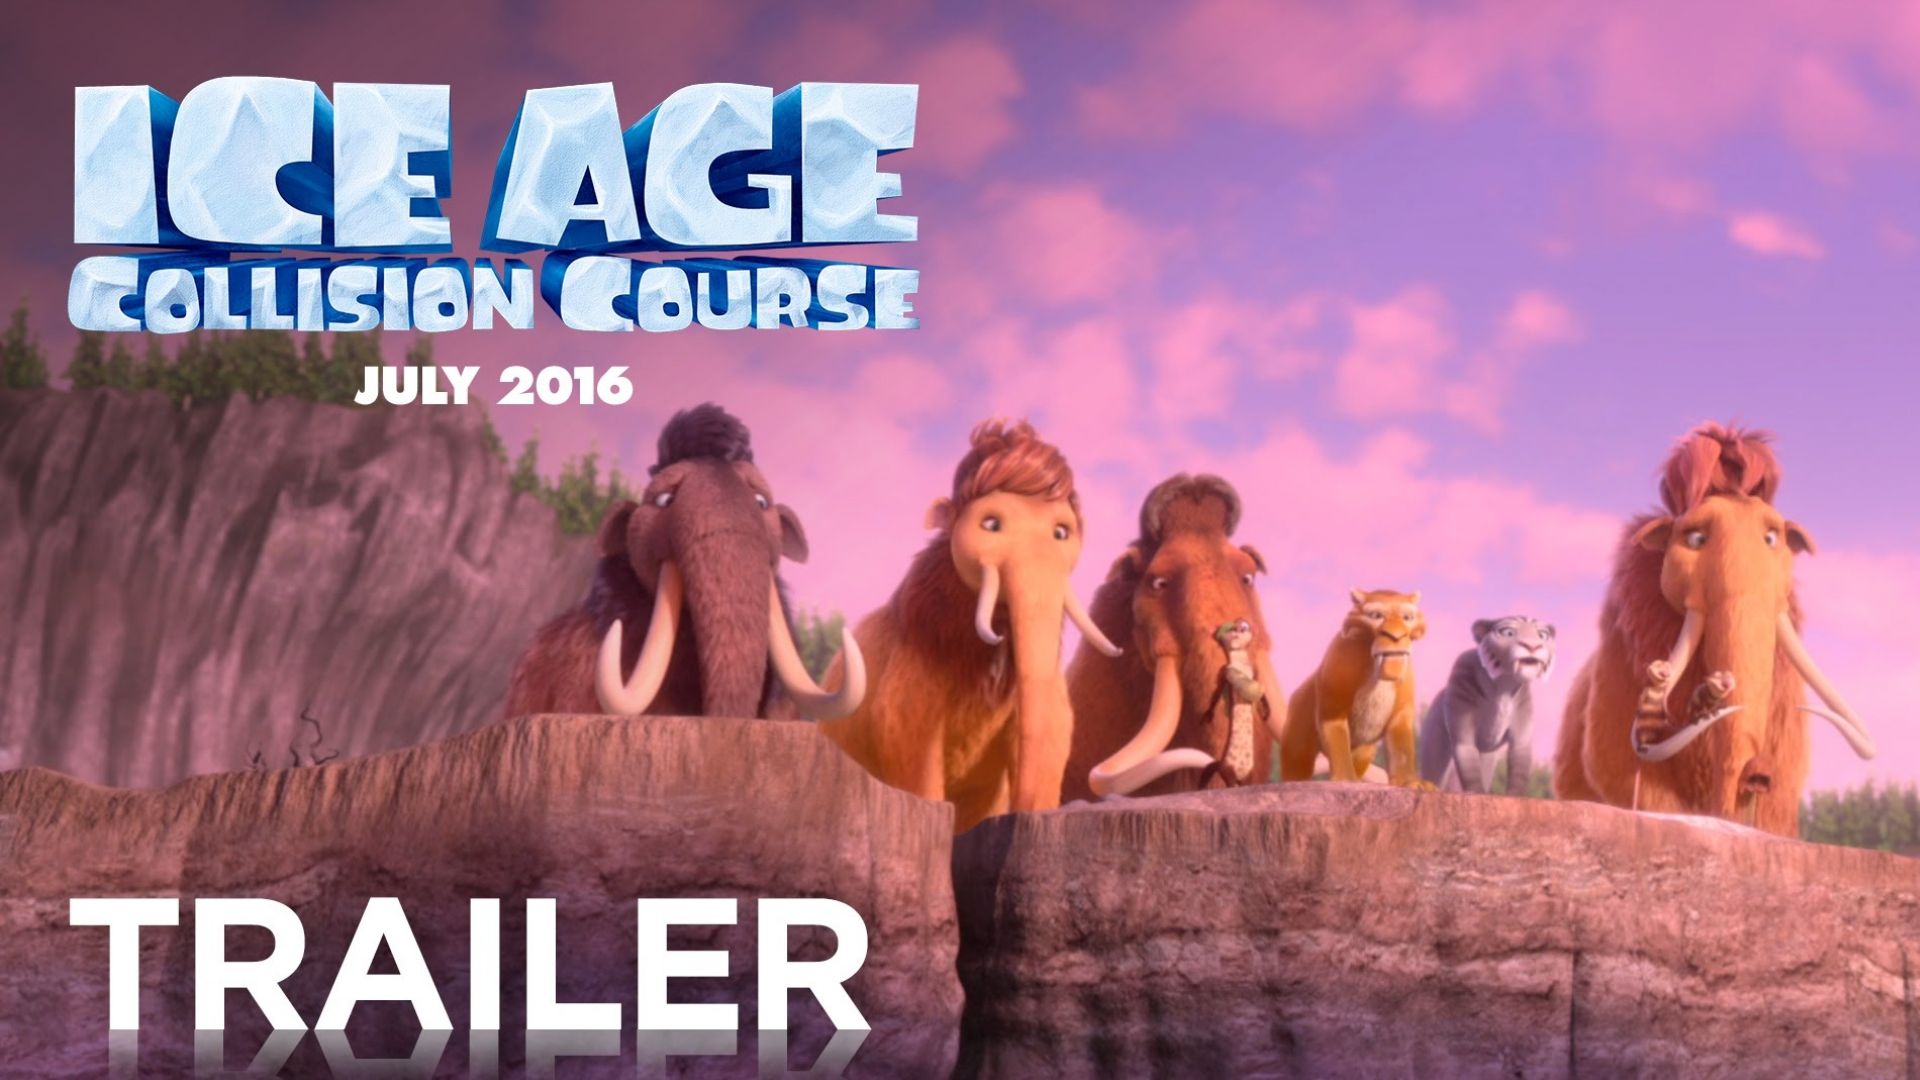 Ice Age: Collision Course Official Trailer #2. Will hit the 